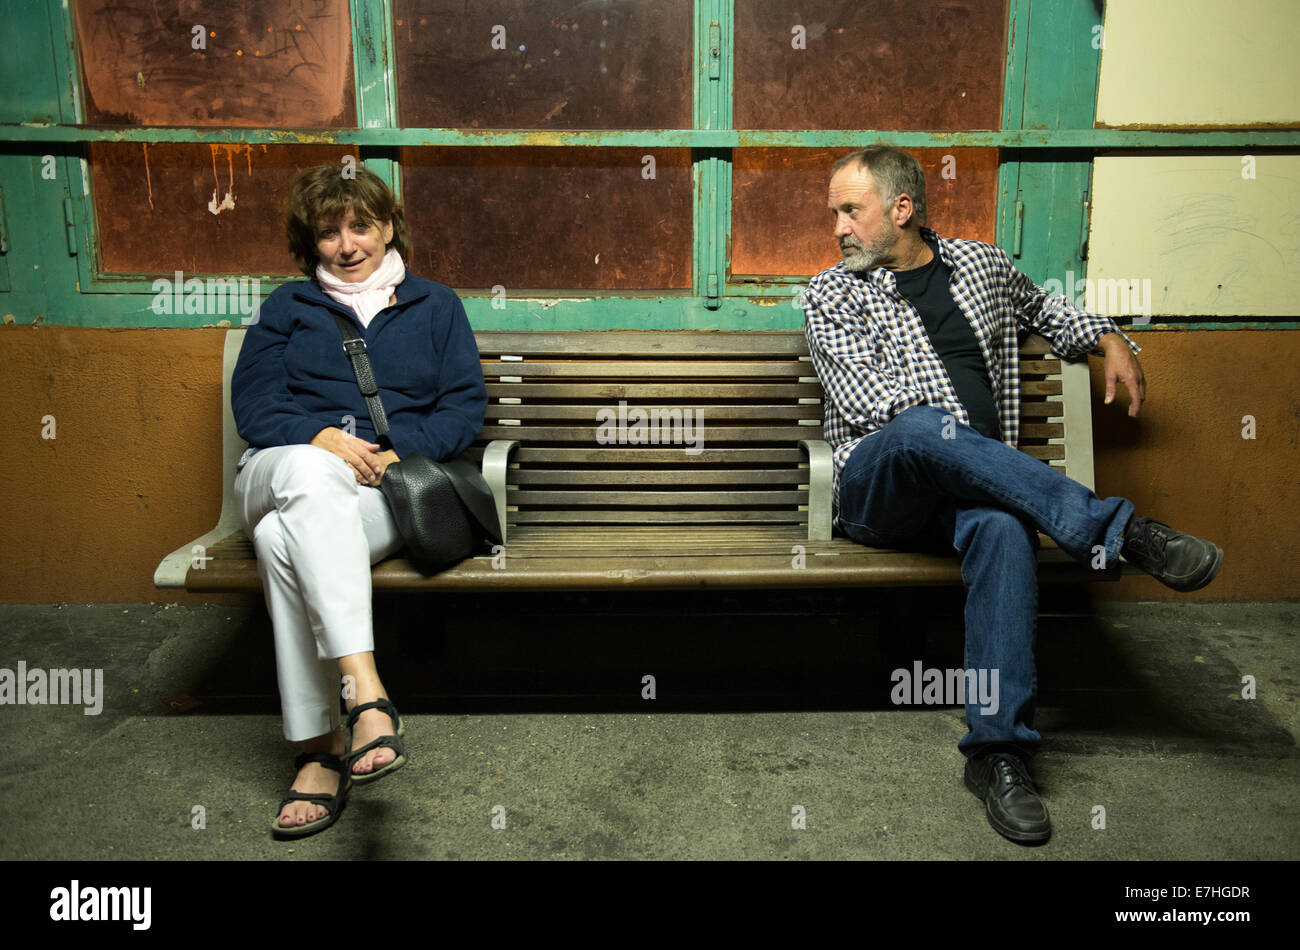 Man ogling woman on a bench while waiting for a train Stock Photo